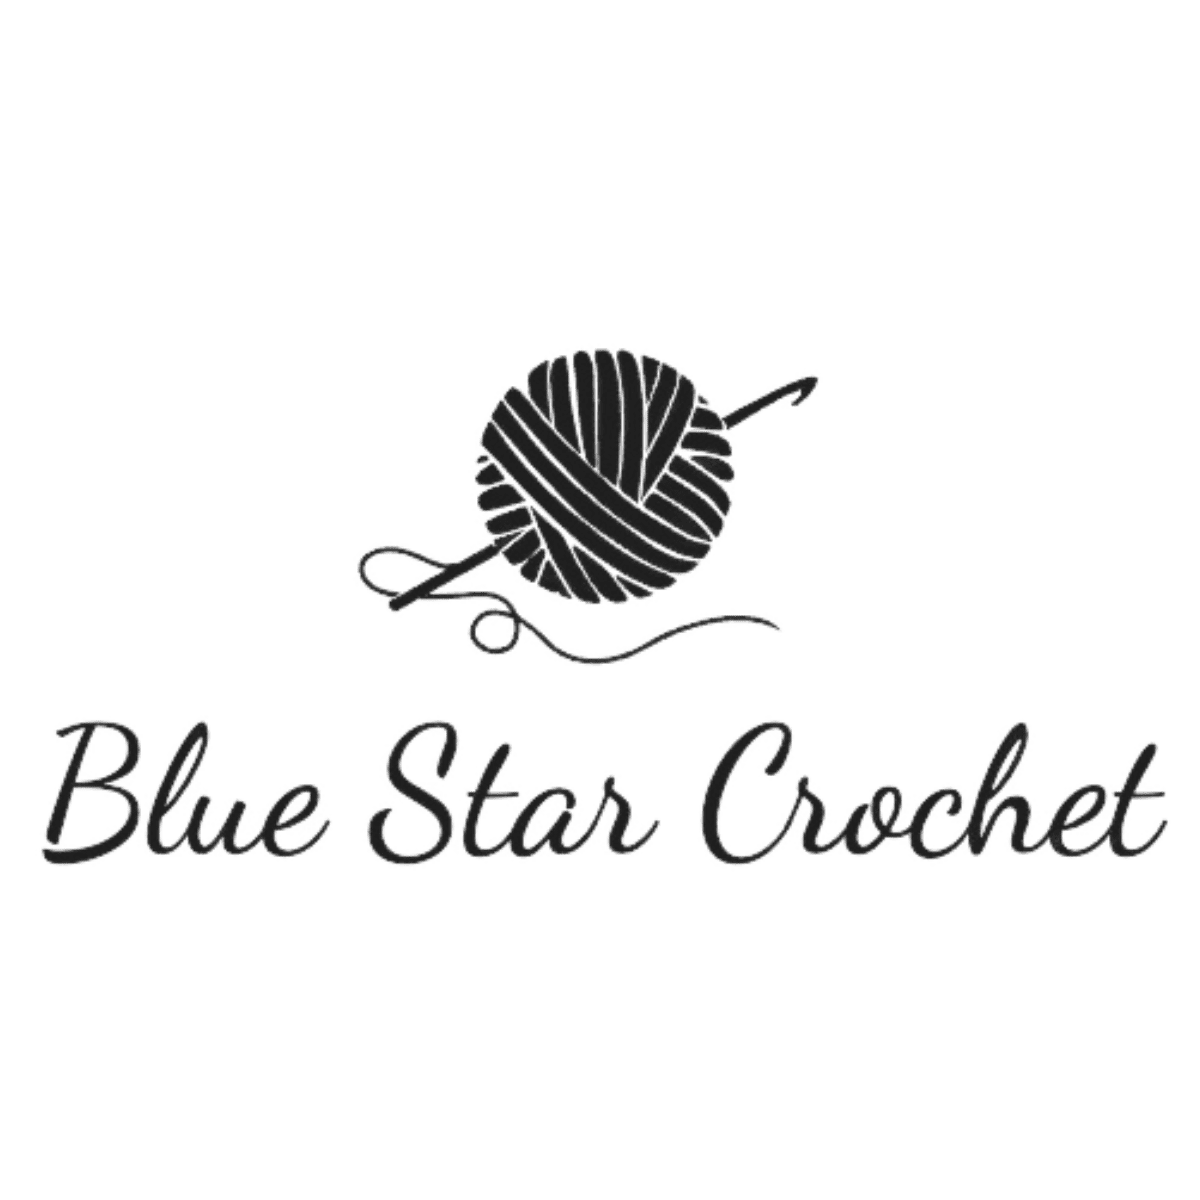 Logo of crochet garment summit featuring a blue star and a yarn ball with crochet hook and scissors.